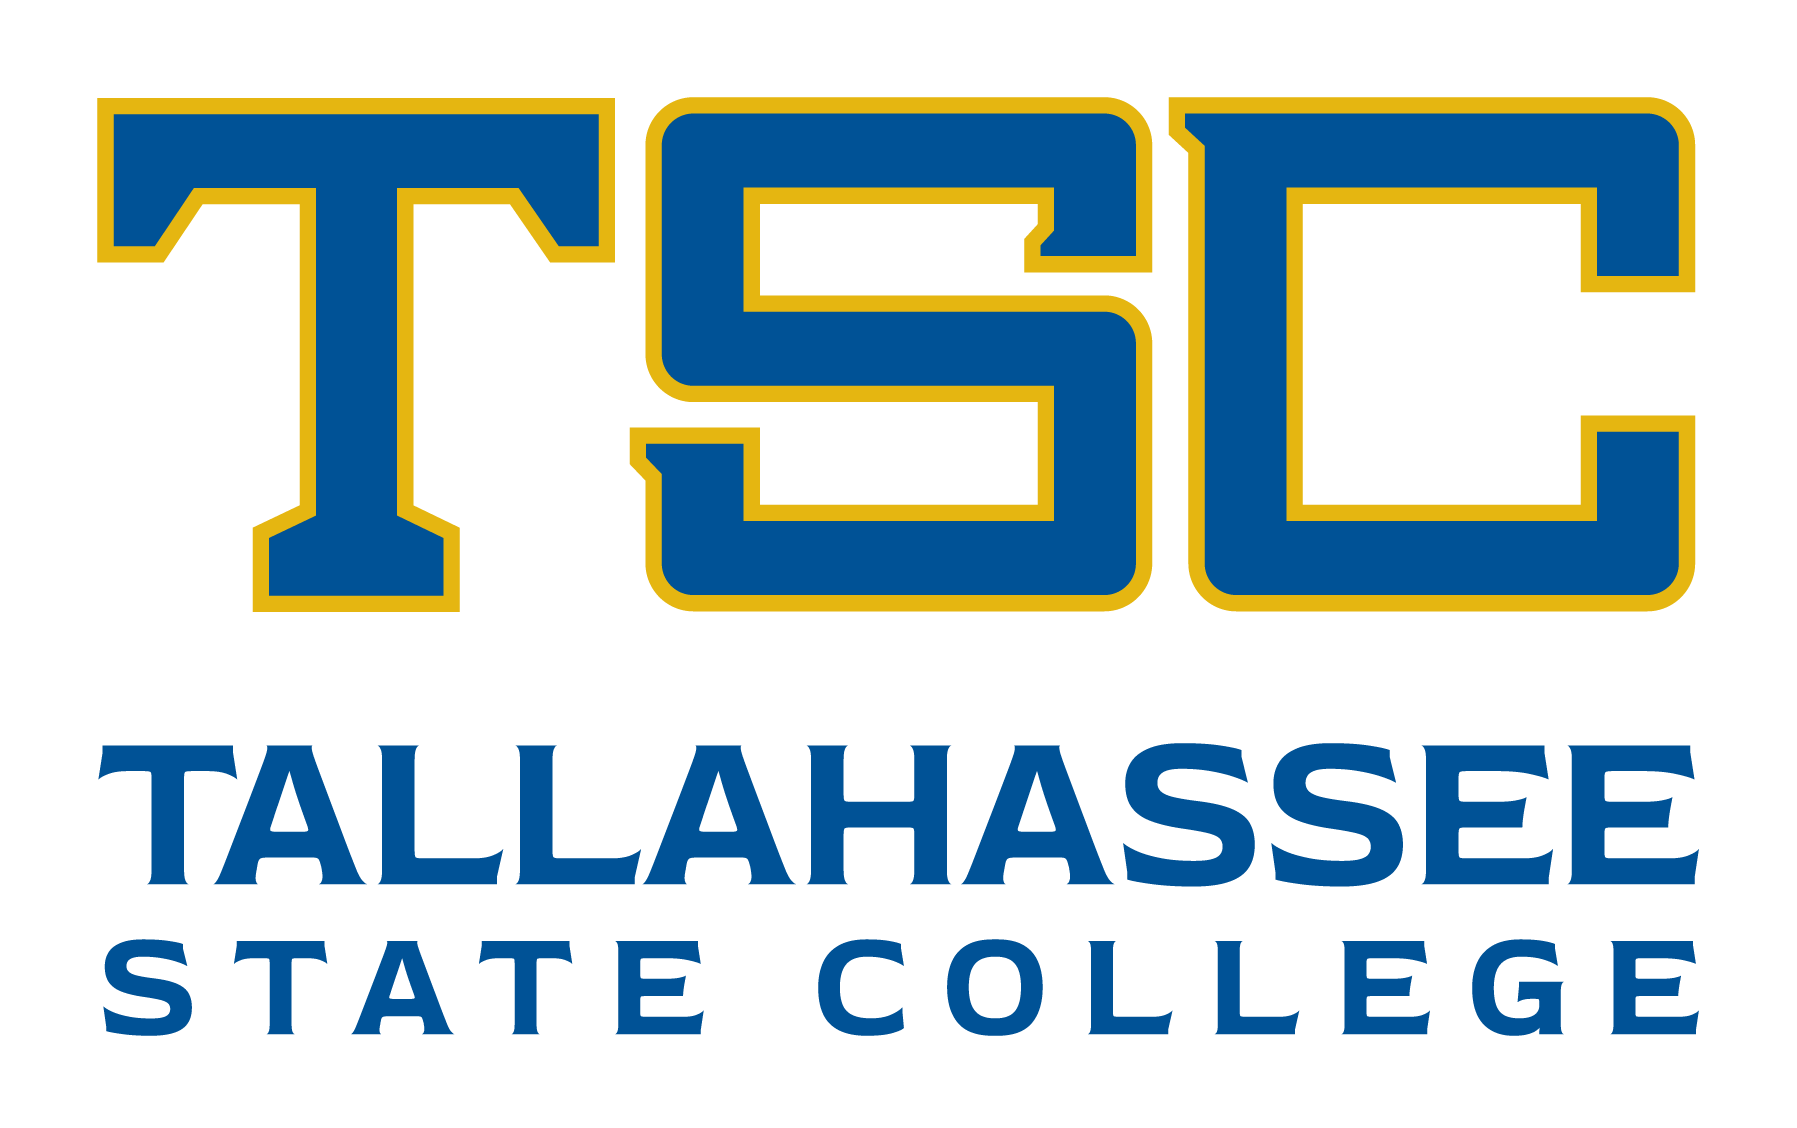 TSC Tallahassee State College logo in blue and yellow